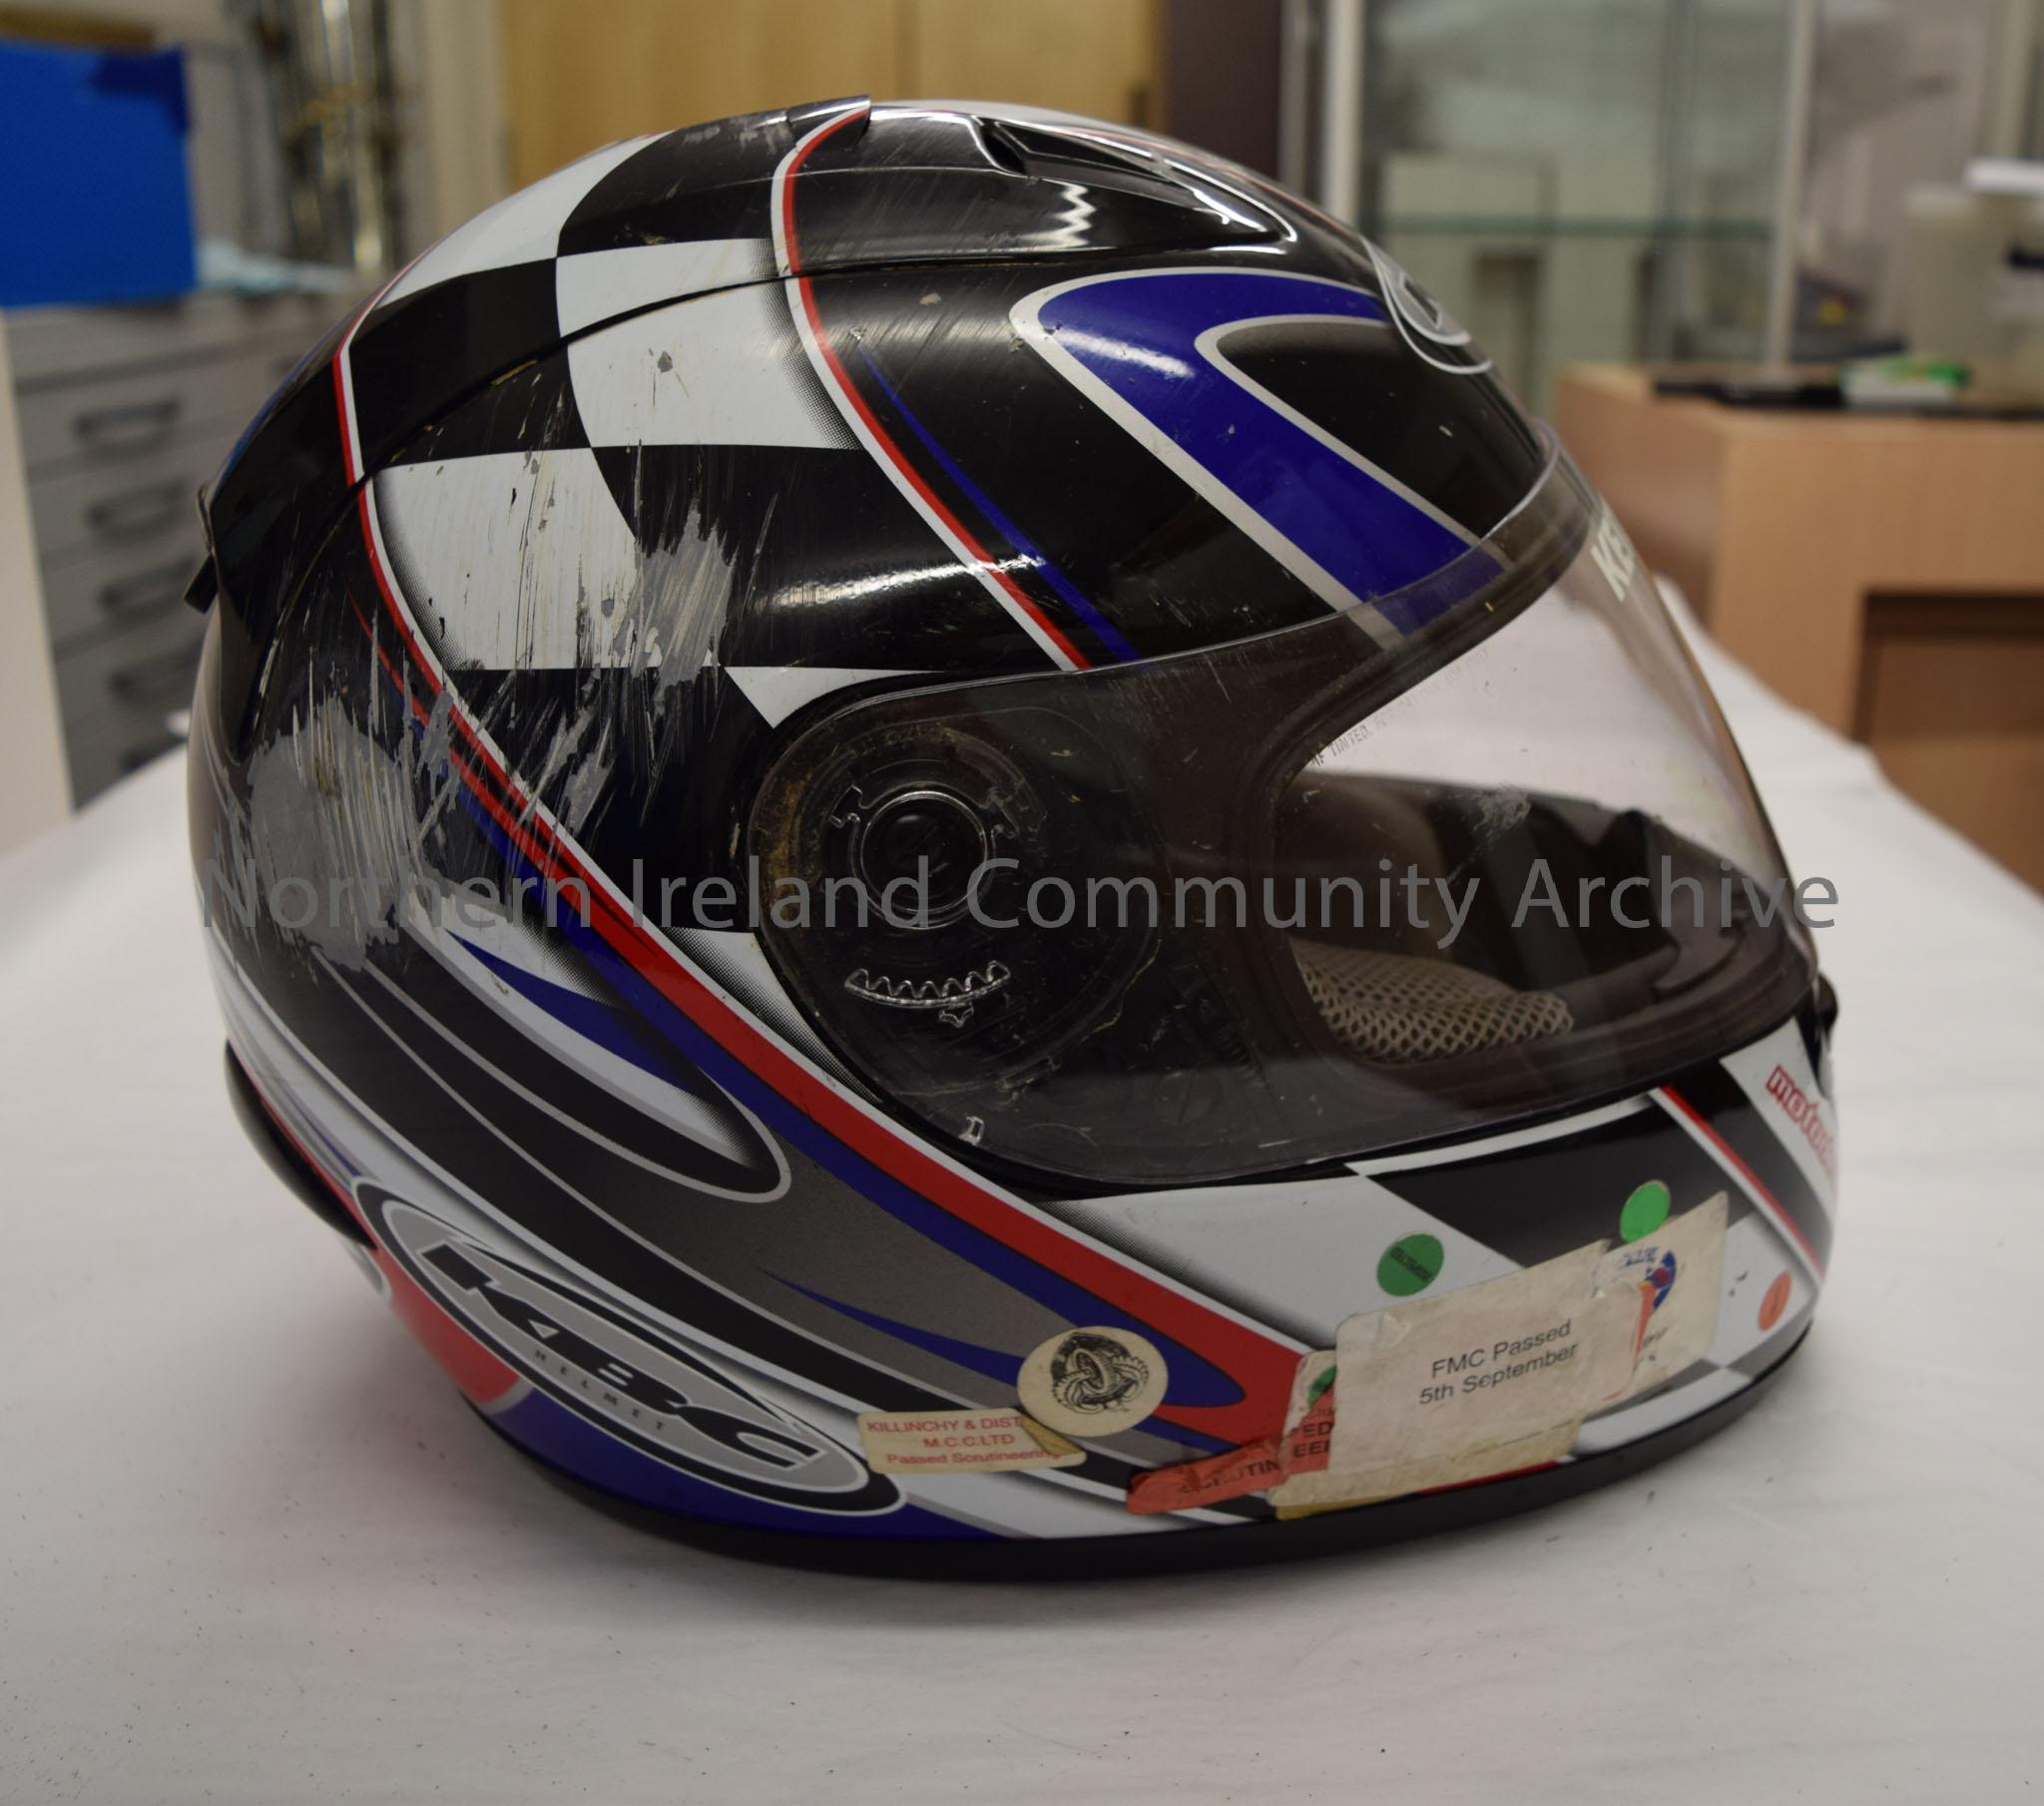 KBC motorcycle helmet belonging to Keith Bruce. Black and white chequered pattern with blue and red stripes. – 2016.75 (5)